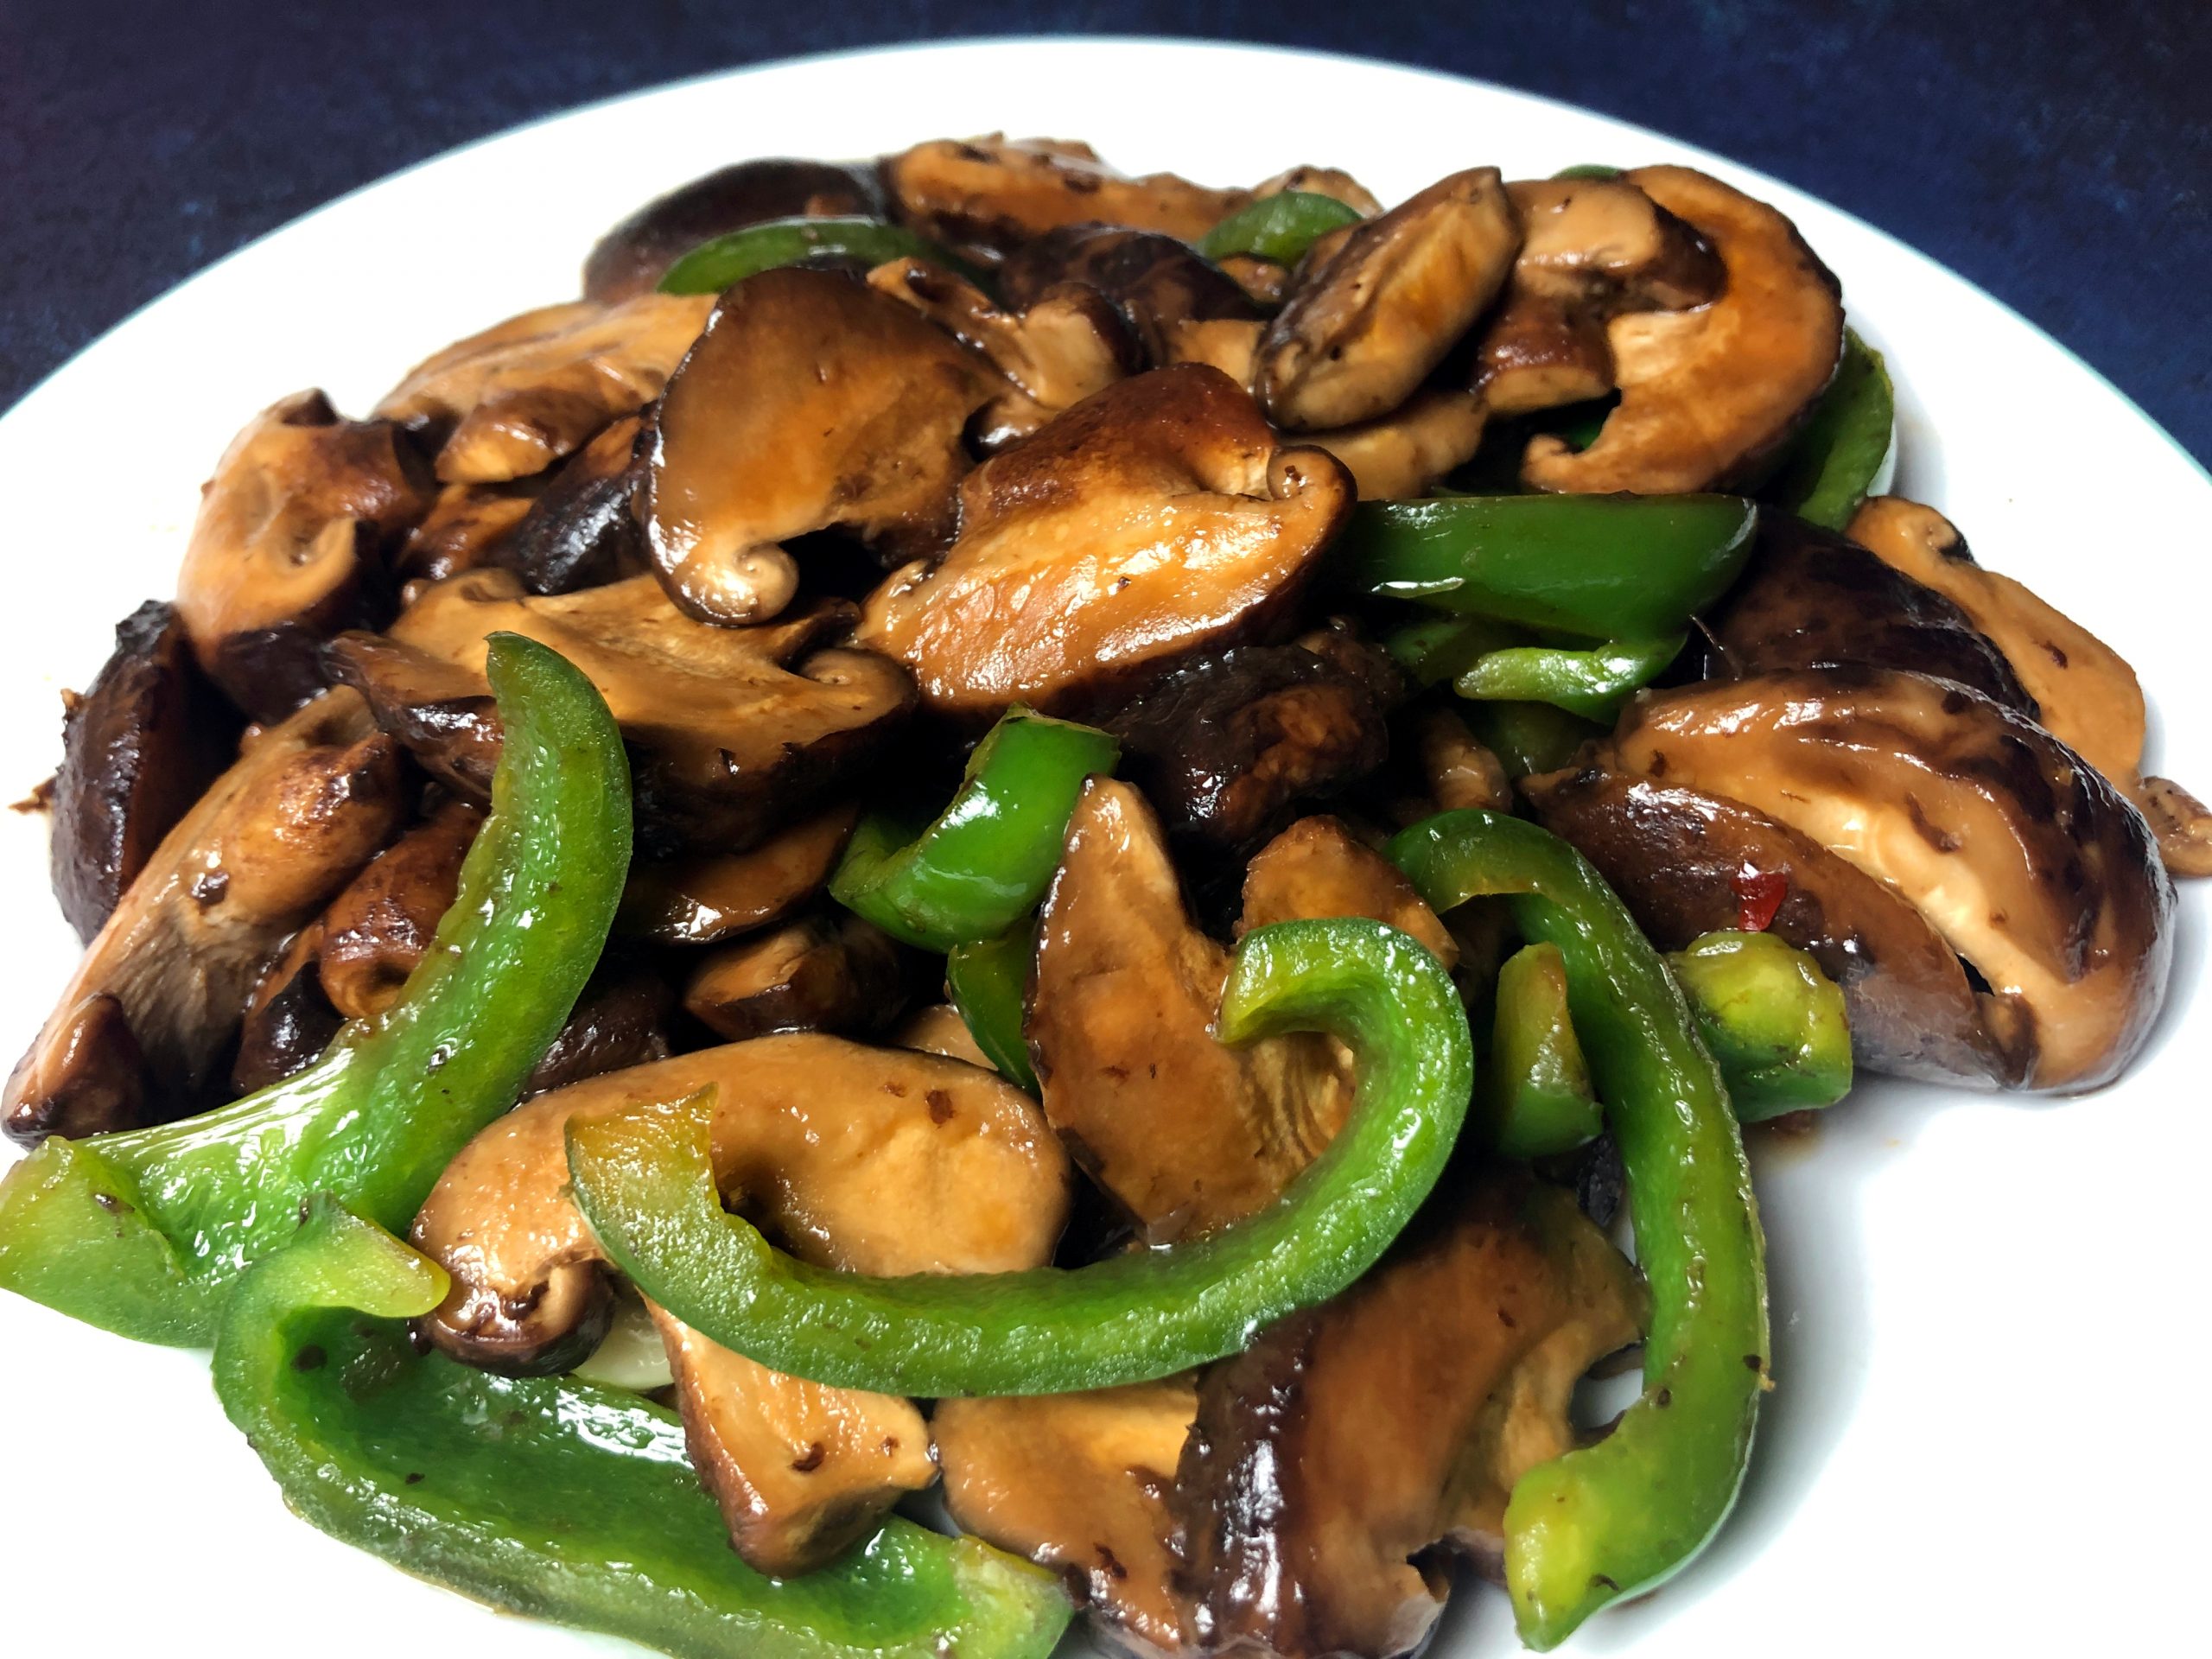 Shiitake Mushrooms Stir Fry With Peppers Oh Snap Let S Eat